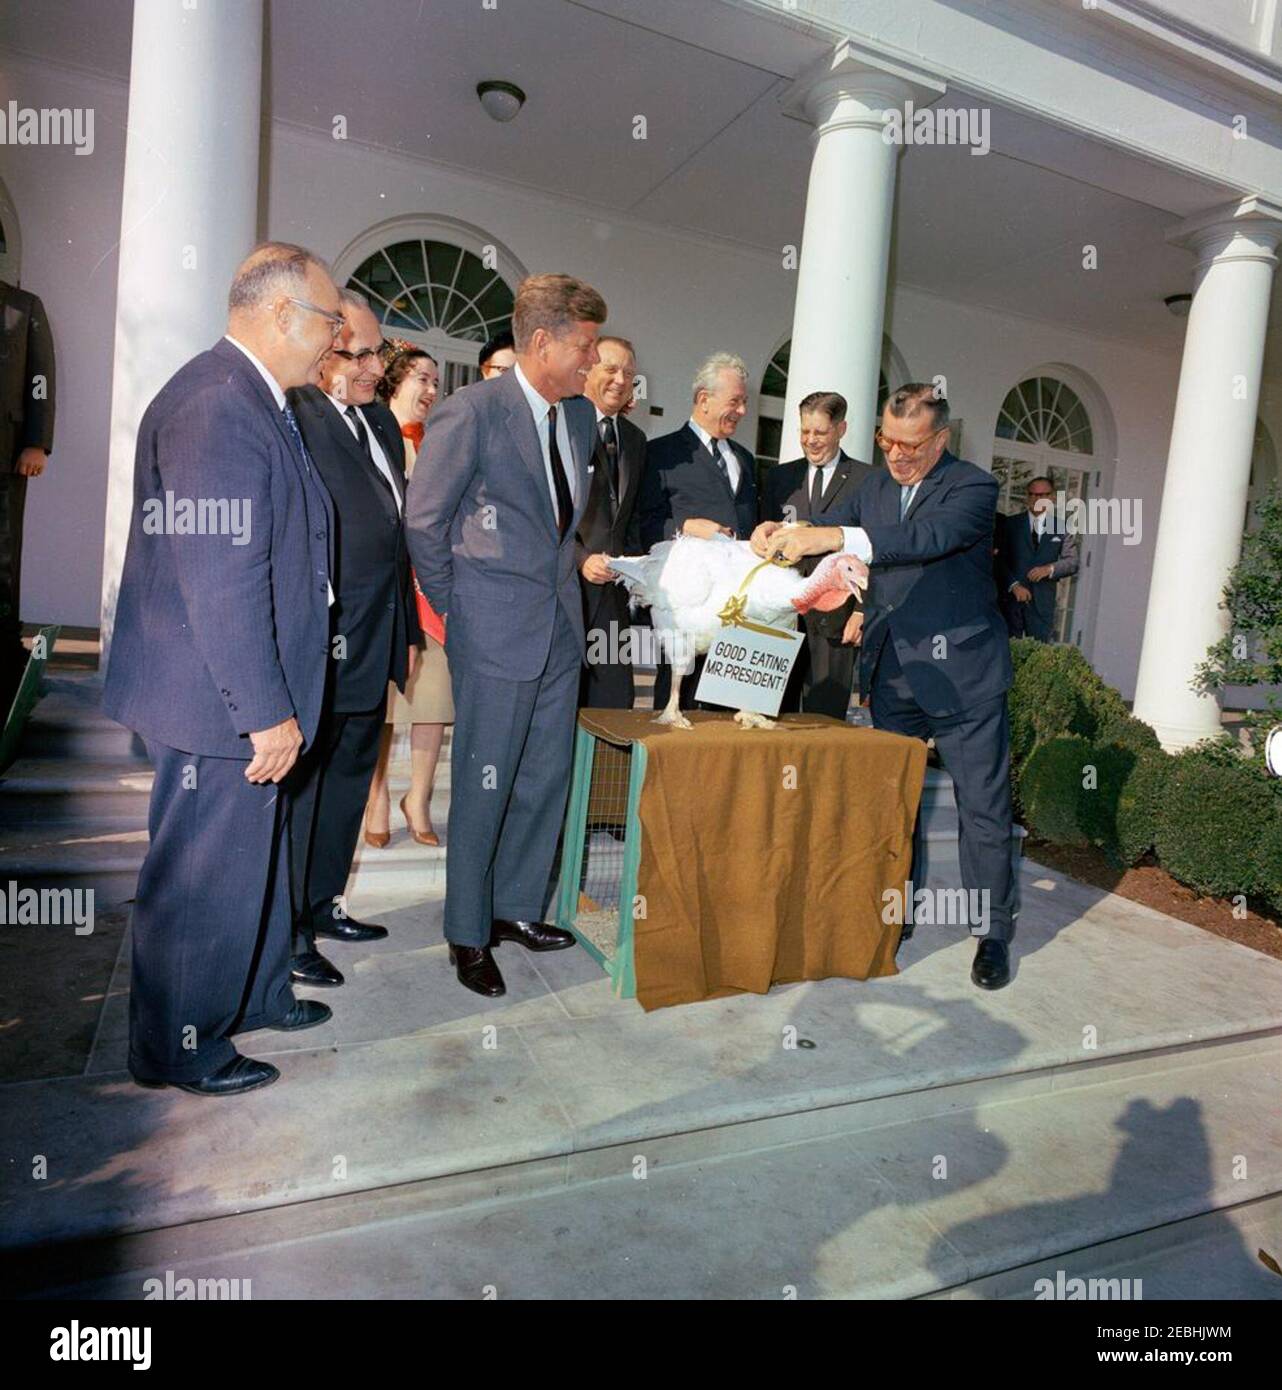 Presentation of a Thanksgiving Turkey to President Kennedy, 10:00AM. President John F. Kennedy laughs with officials at the presentation of a Thanksgiving turkey by the National Turkey Federation and the Poultry and Egg National Board; President Kennedy pardoned the turkey. Left to right: Vice President of the National Turkey Federation, Morris G. Smith; two unidentified persons; President Kennedy; President of the National Turkey Federation, Robert M. McPherrin; Senator Everett Dirksen (Illinois); Executive Secretary-Treasurer of the National Turkey Federation, M. C. Small. Also present: Pres Stock Photo